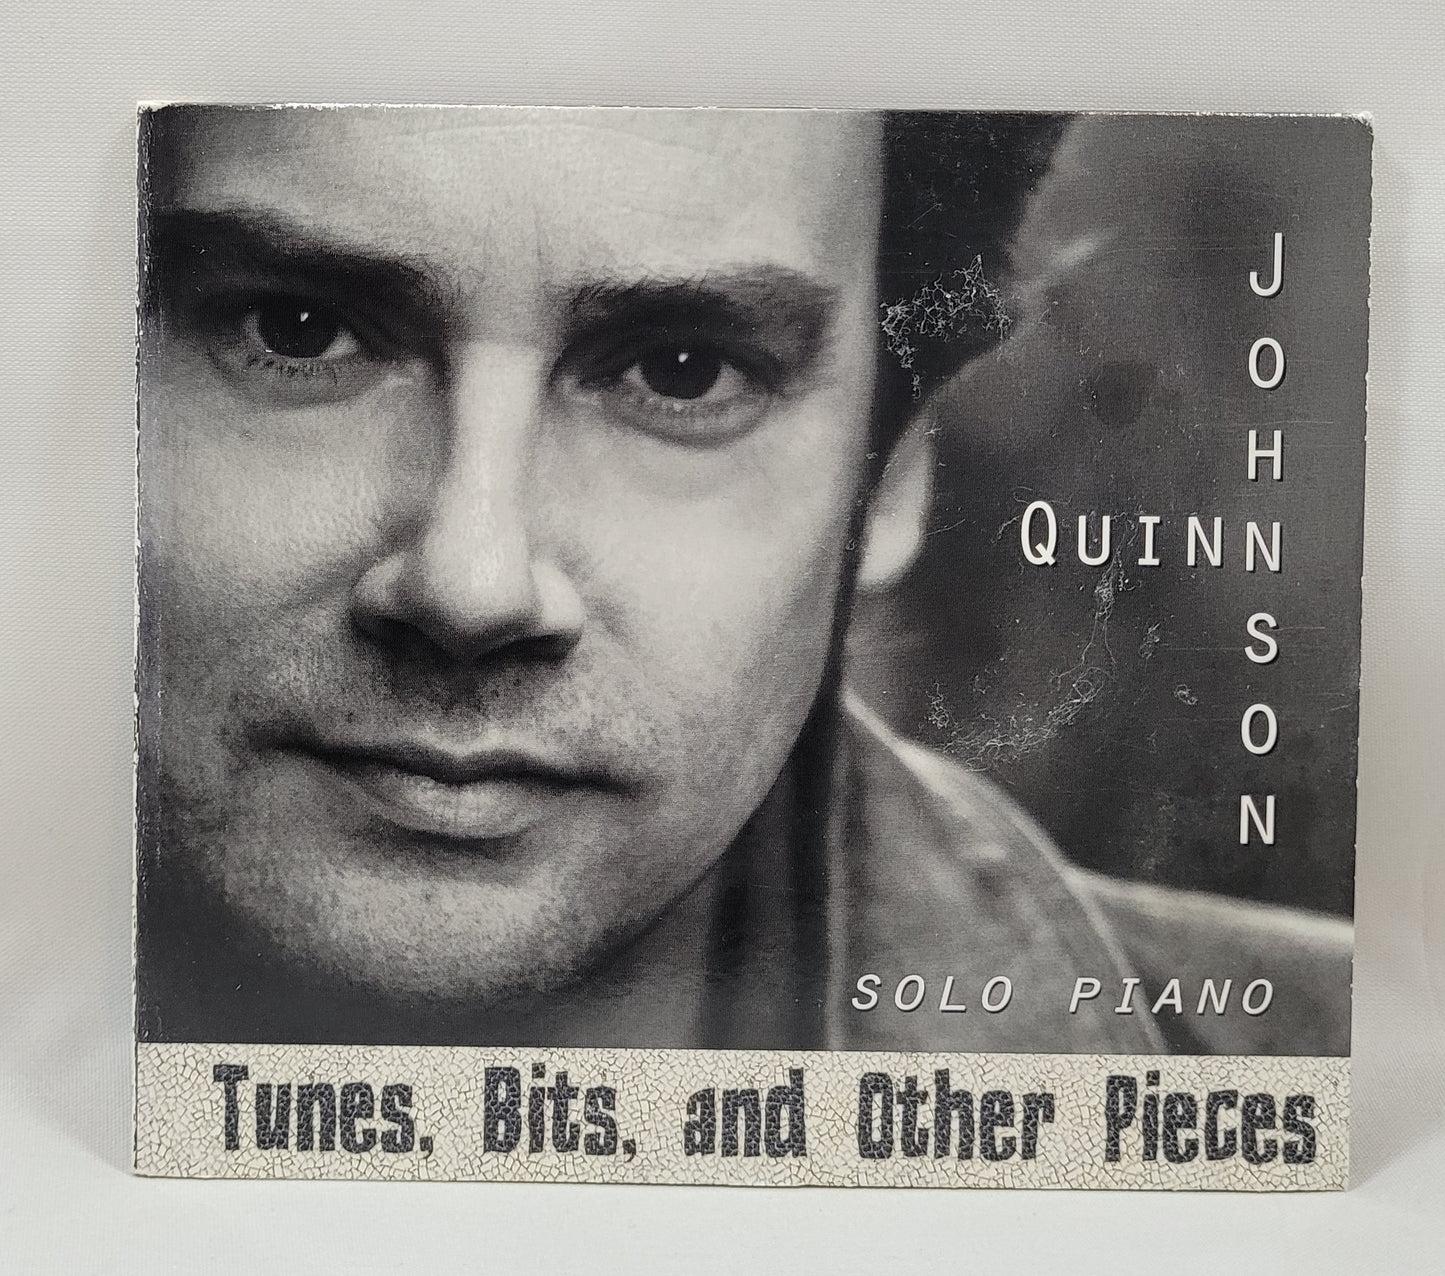 Quinn Johnson - Tunes, Bits, and Other Pieces - Solo Piano [2012 Used CD]